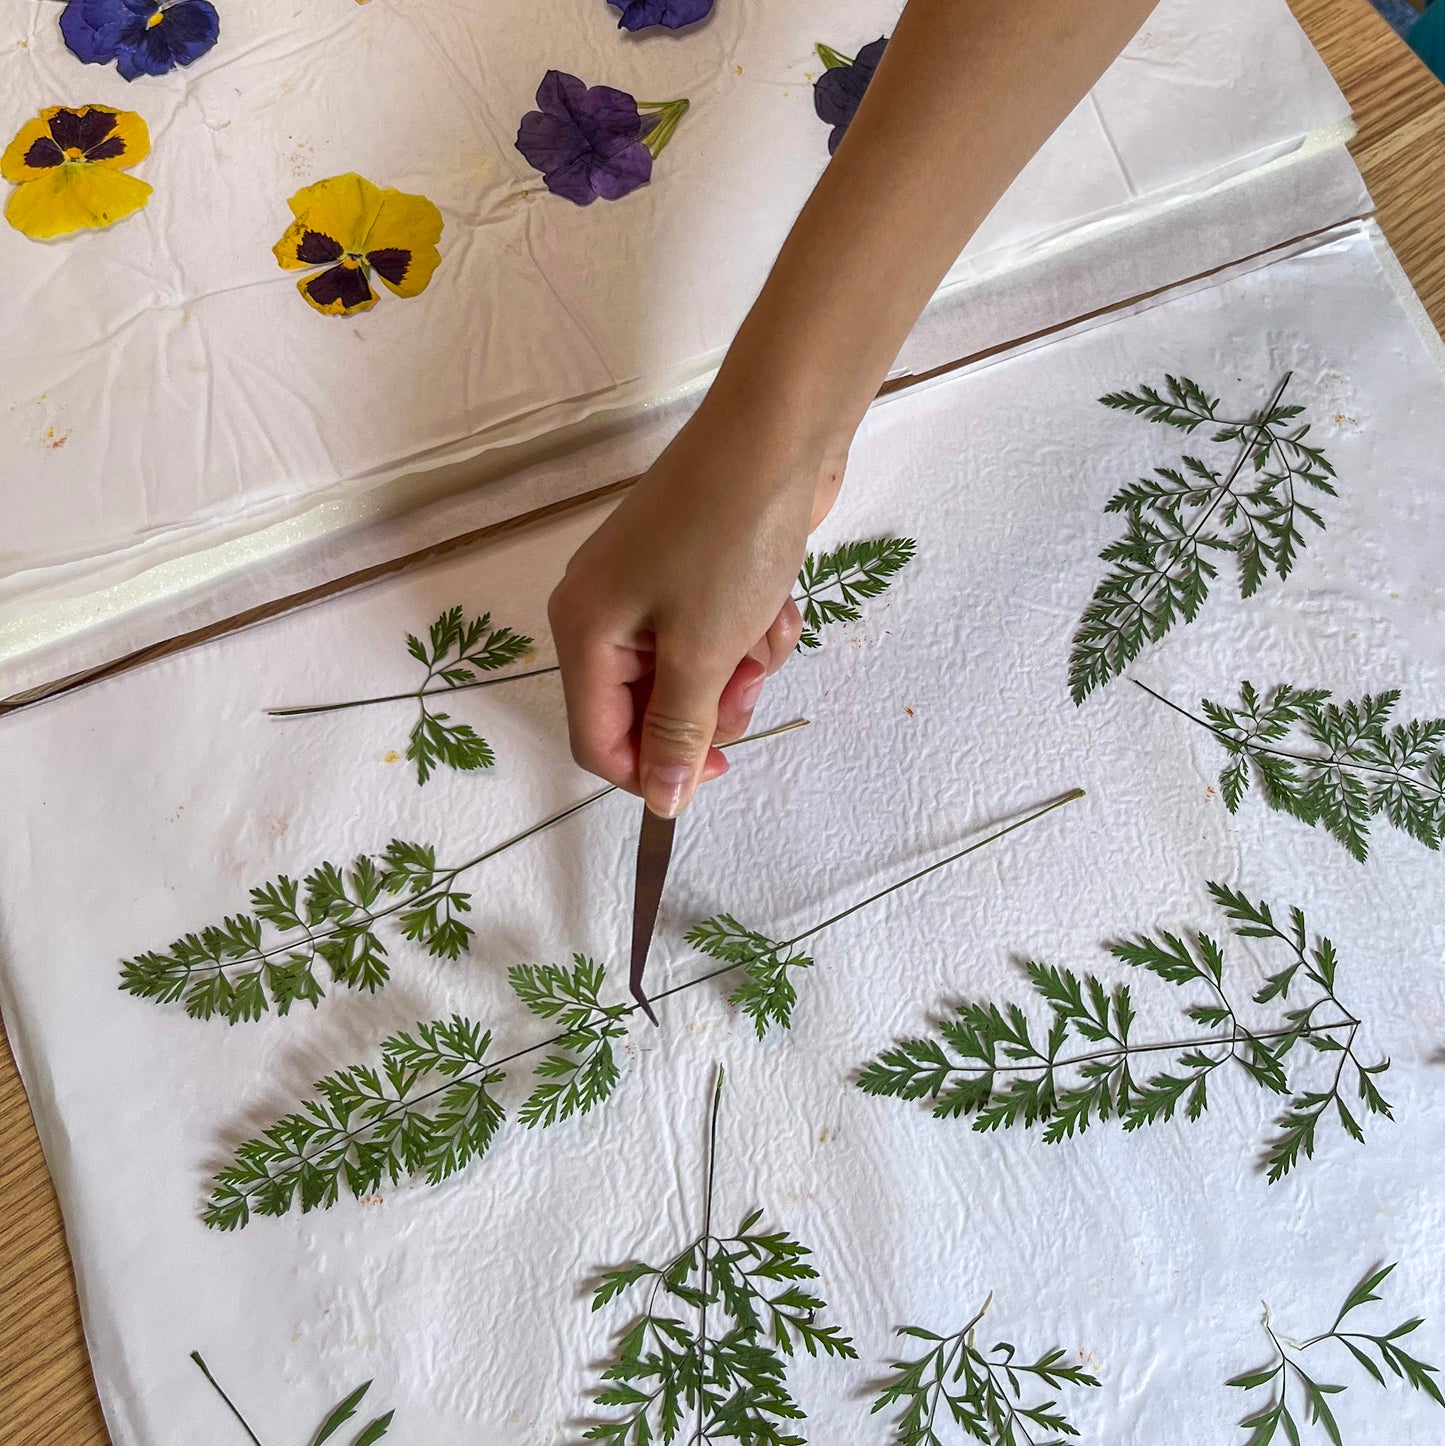 Kids Summer 3-Day Workshop | Natural Dyeing and Floral Printing | Age 8-14 | July 16th-18th | 9:30am - 12pm